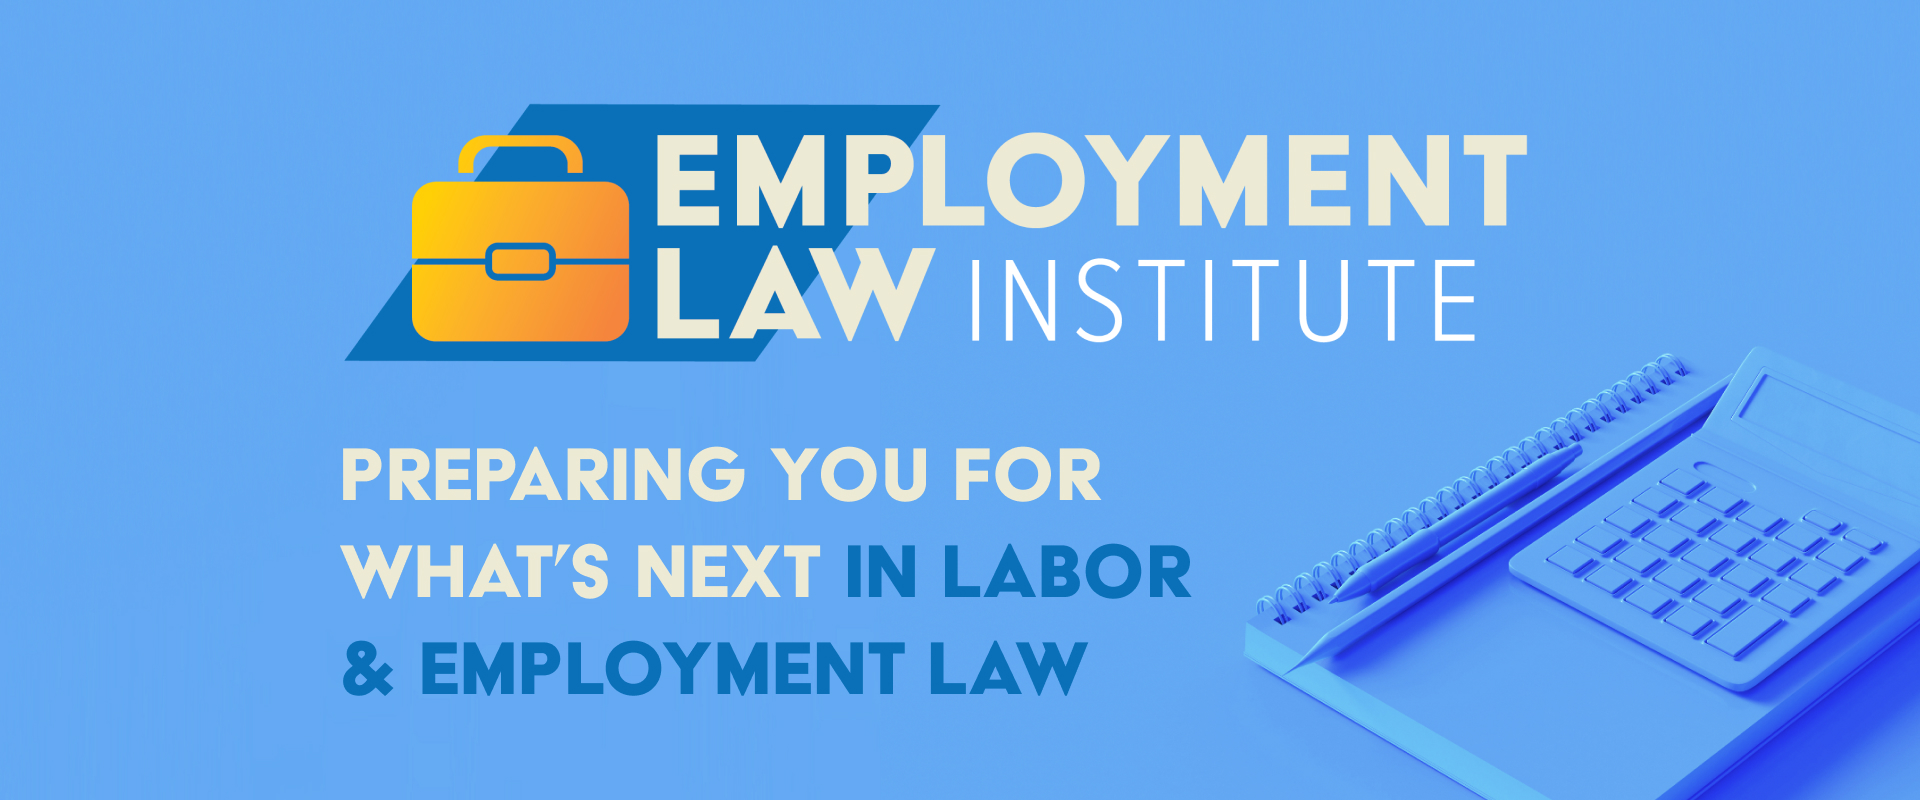 Employment Law Institute Preparing you for What's Next in Labor & Employment Law